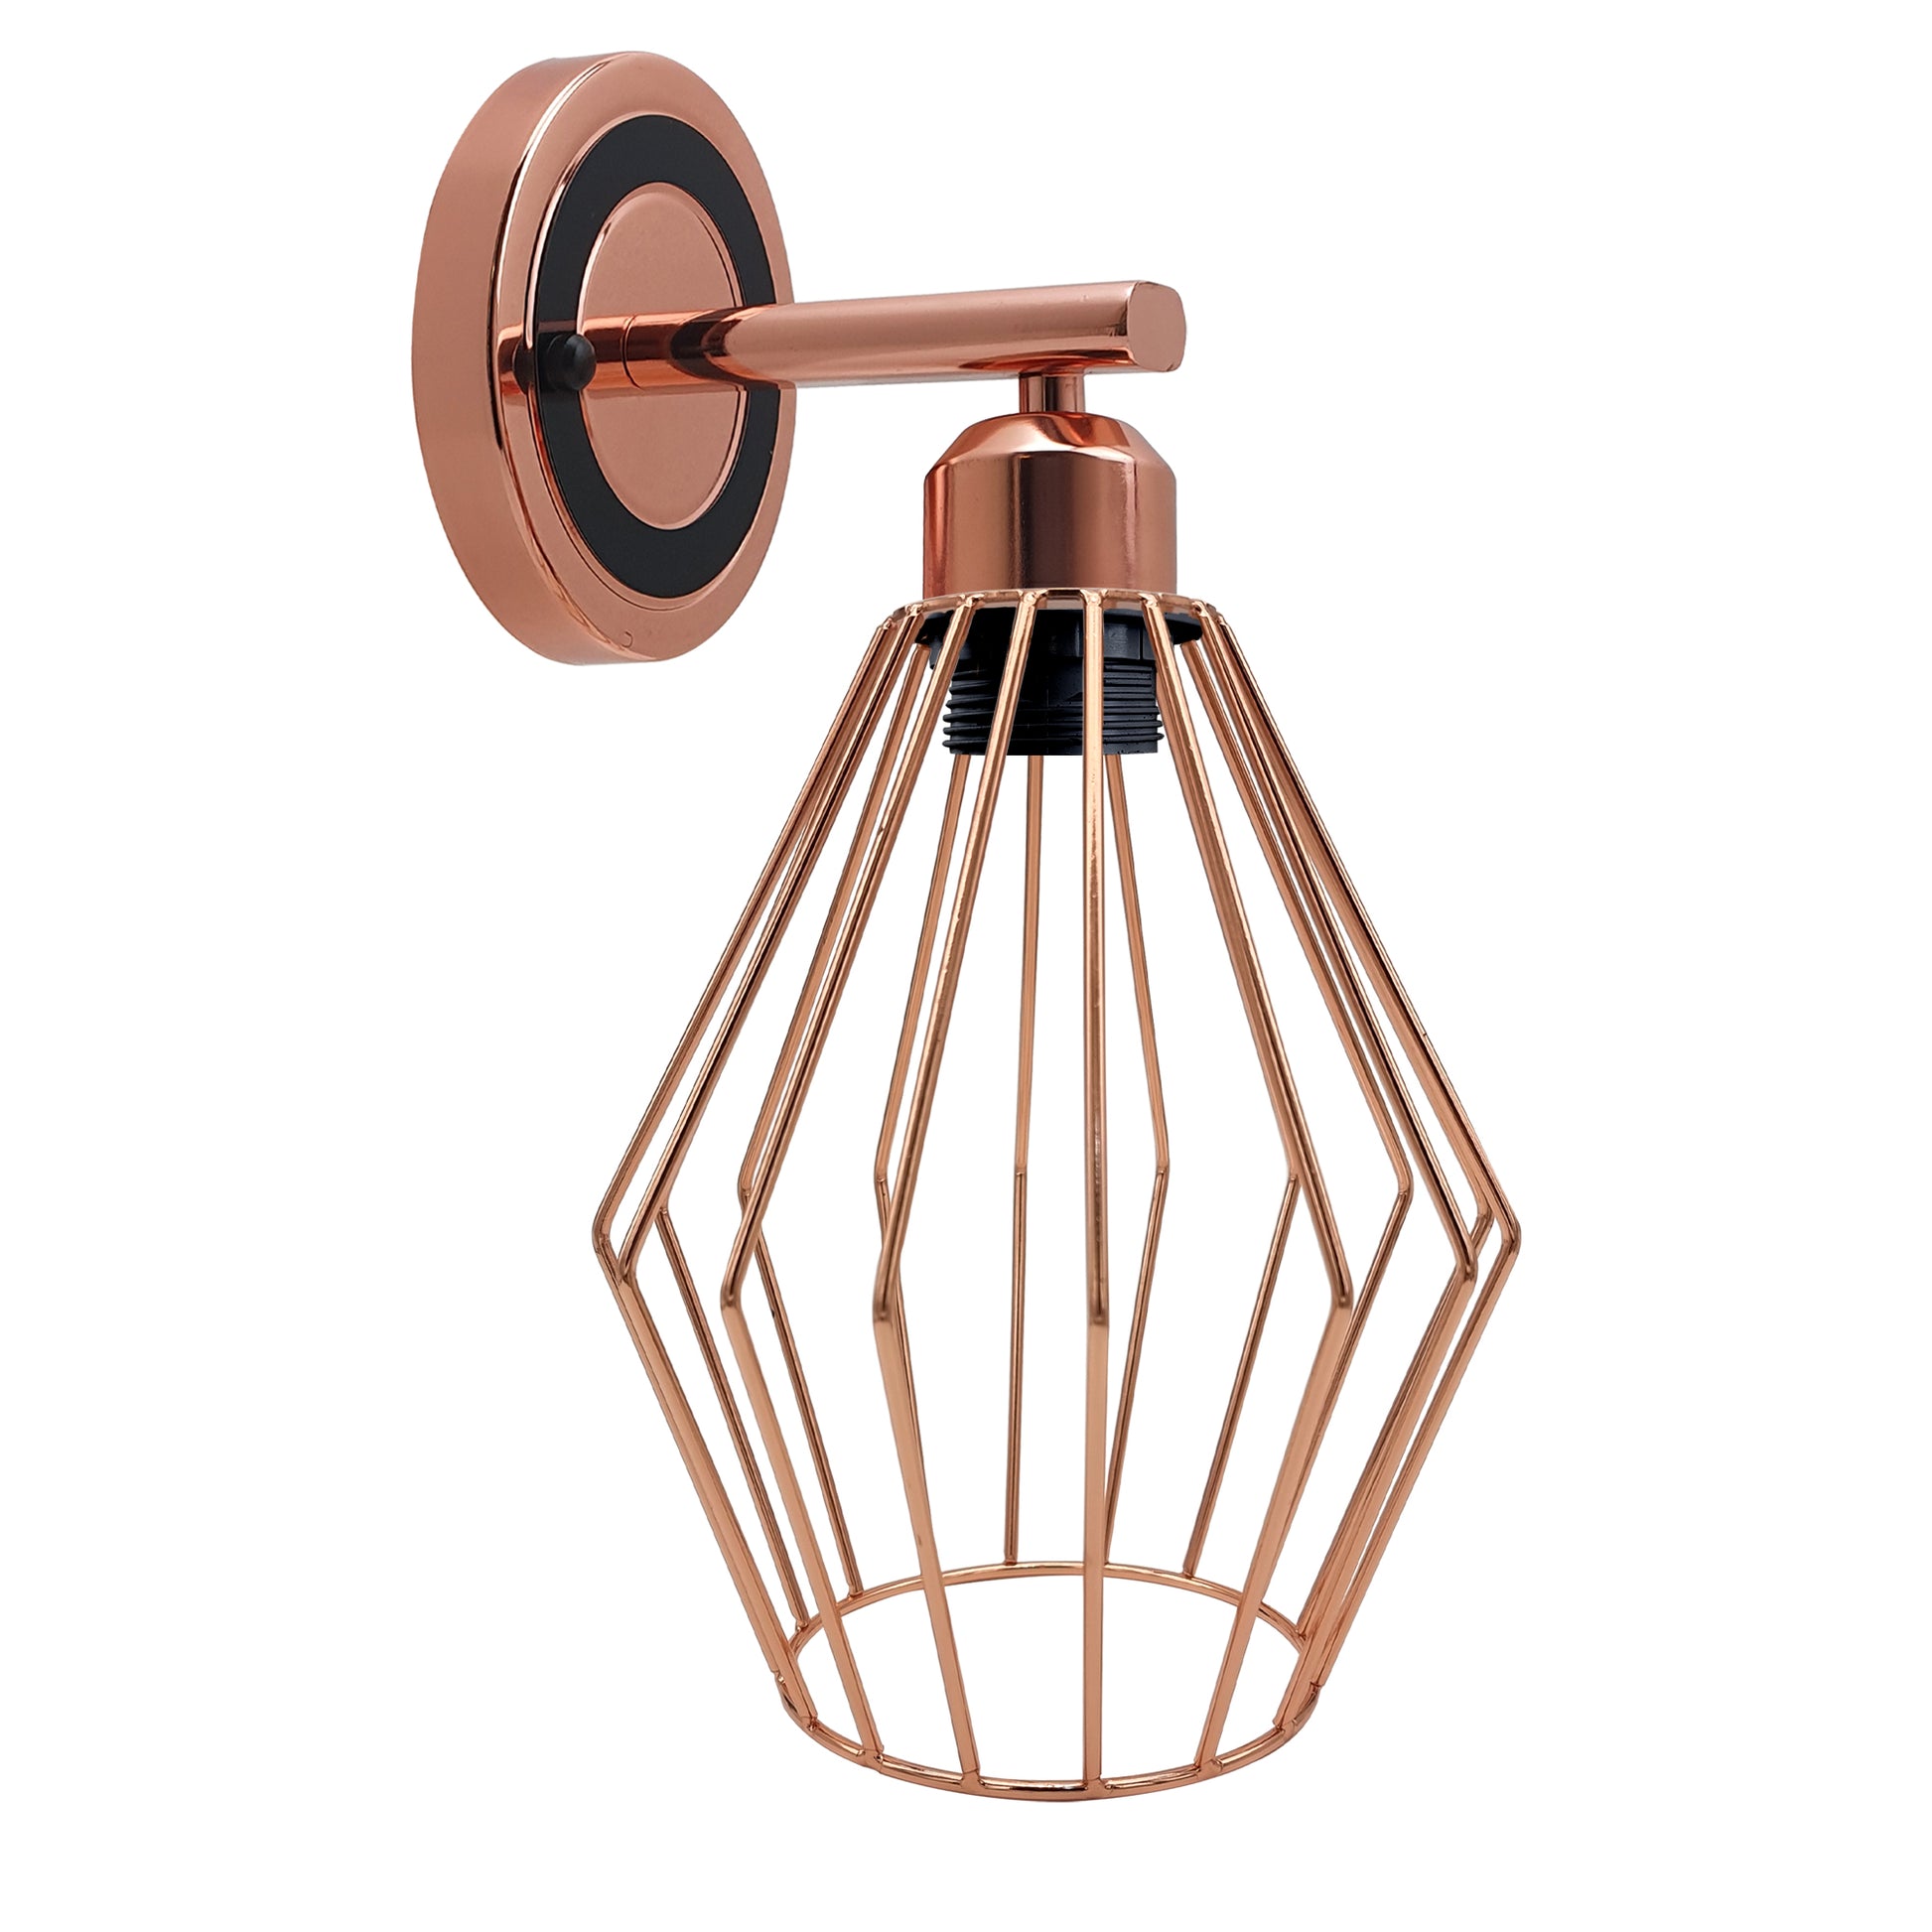 Vintage Retro Industrial Sconce Wall Light Lamp Fitting Rose Gold Fixture~4488